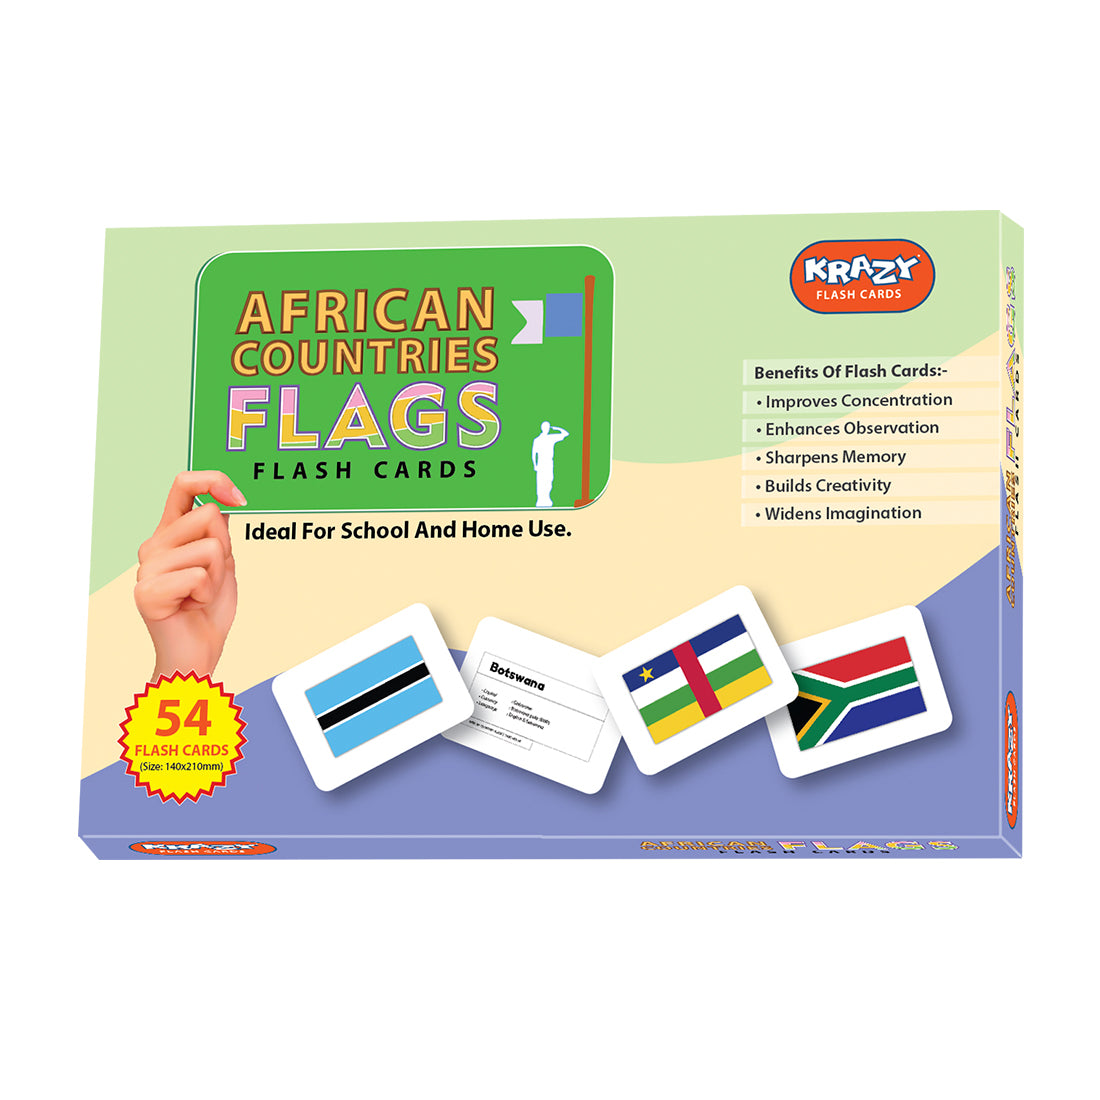 Krazy African Countries Flash Cards